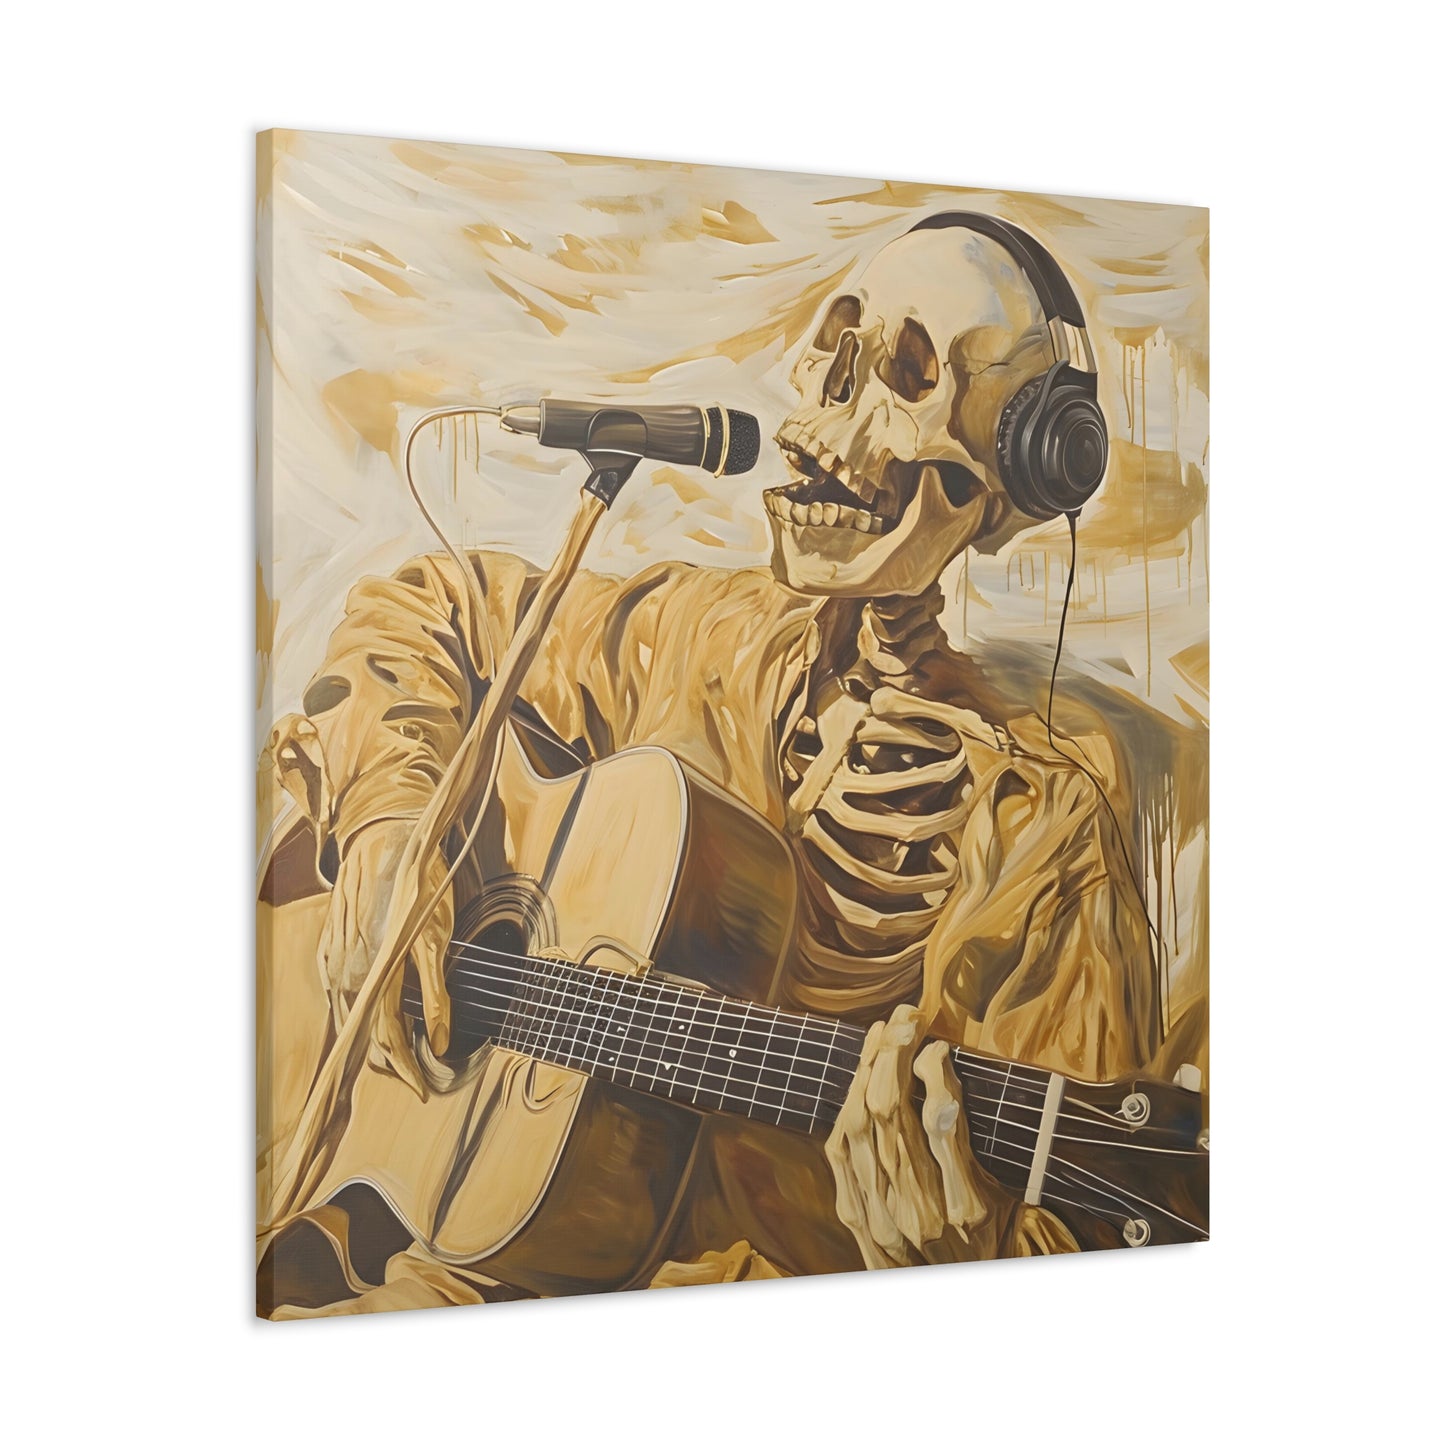 angled 4 depicting a skeleton singing into a microphone, embodying music's redemptive power, inspired by 'American Pie' lyrics, with golden tones symbolizing music's sanctity